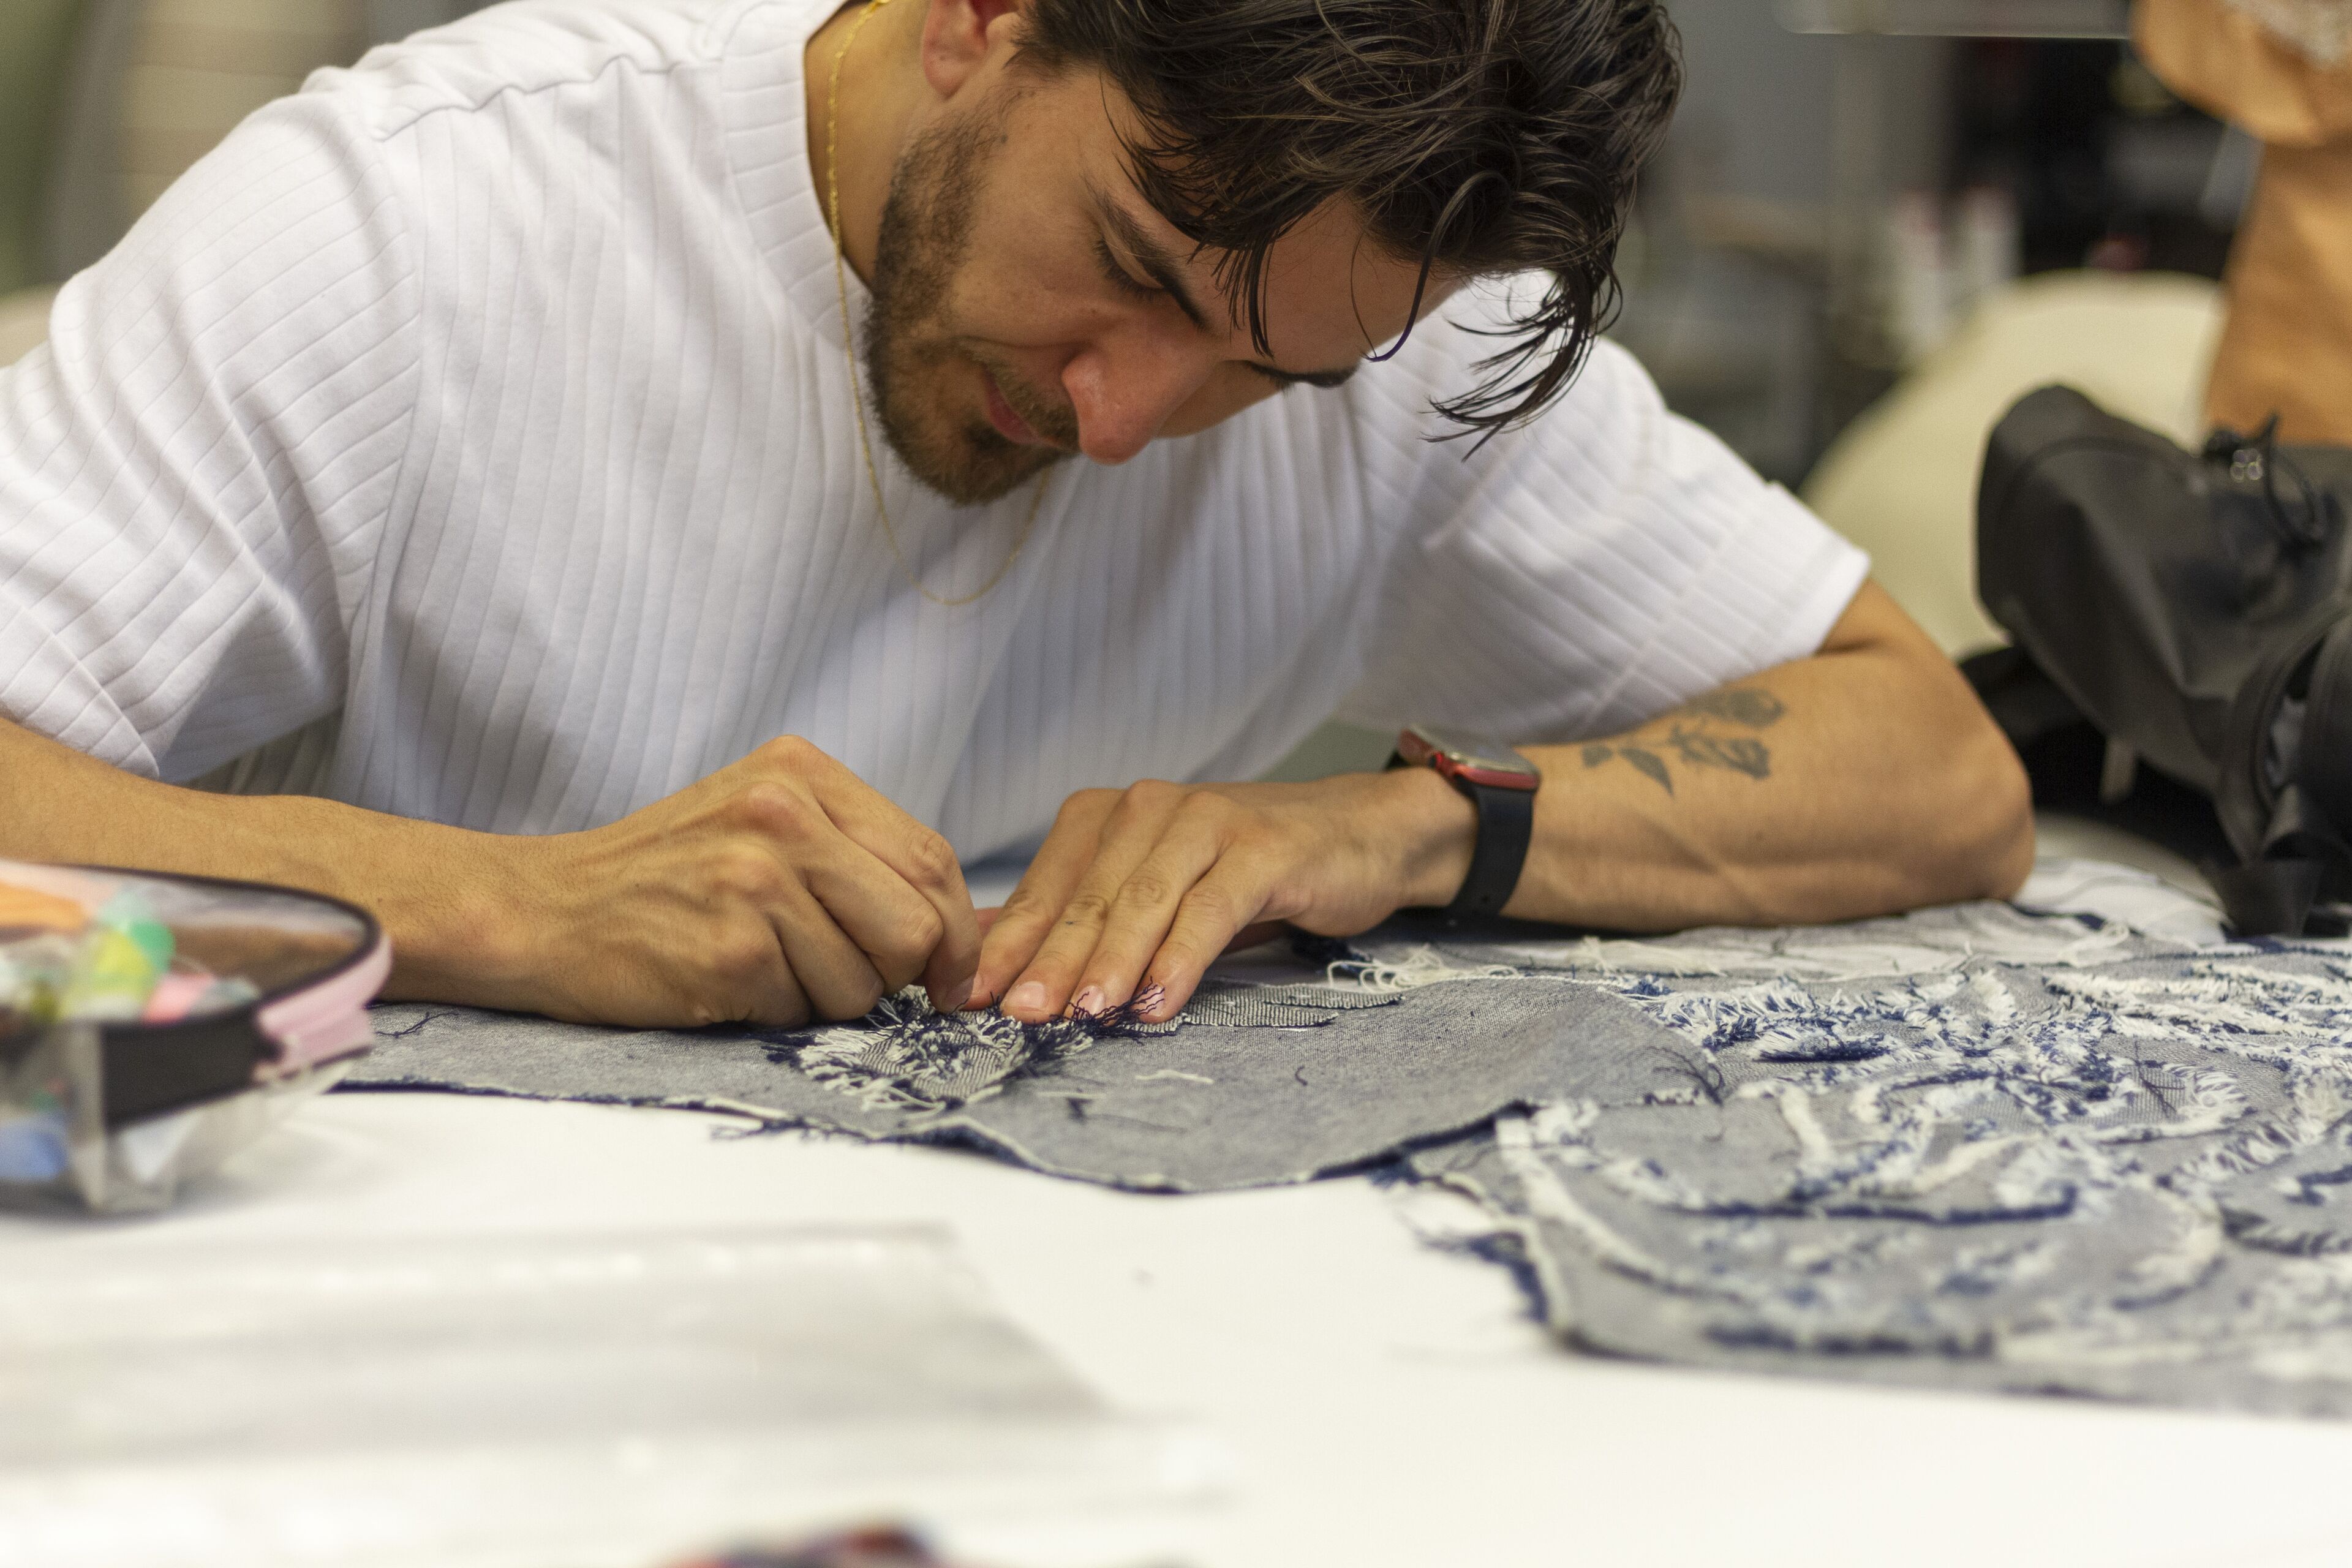 A meticulous artisan carefully embroiders a pattern on a piece of fabric, focused on the delicate task at hand.